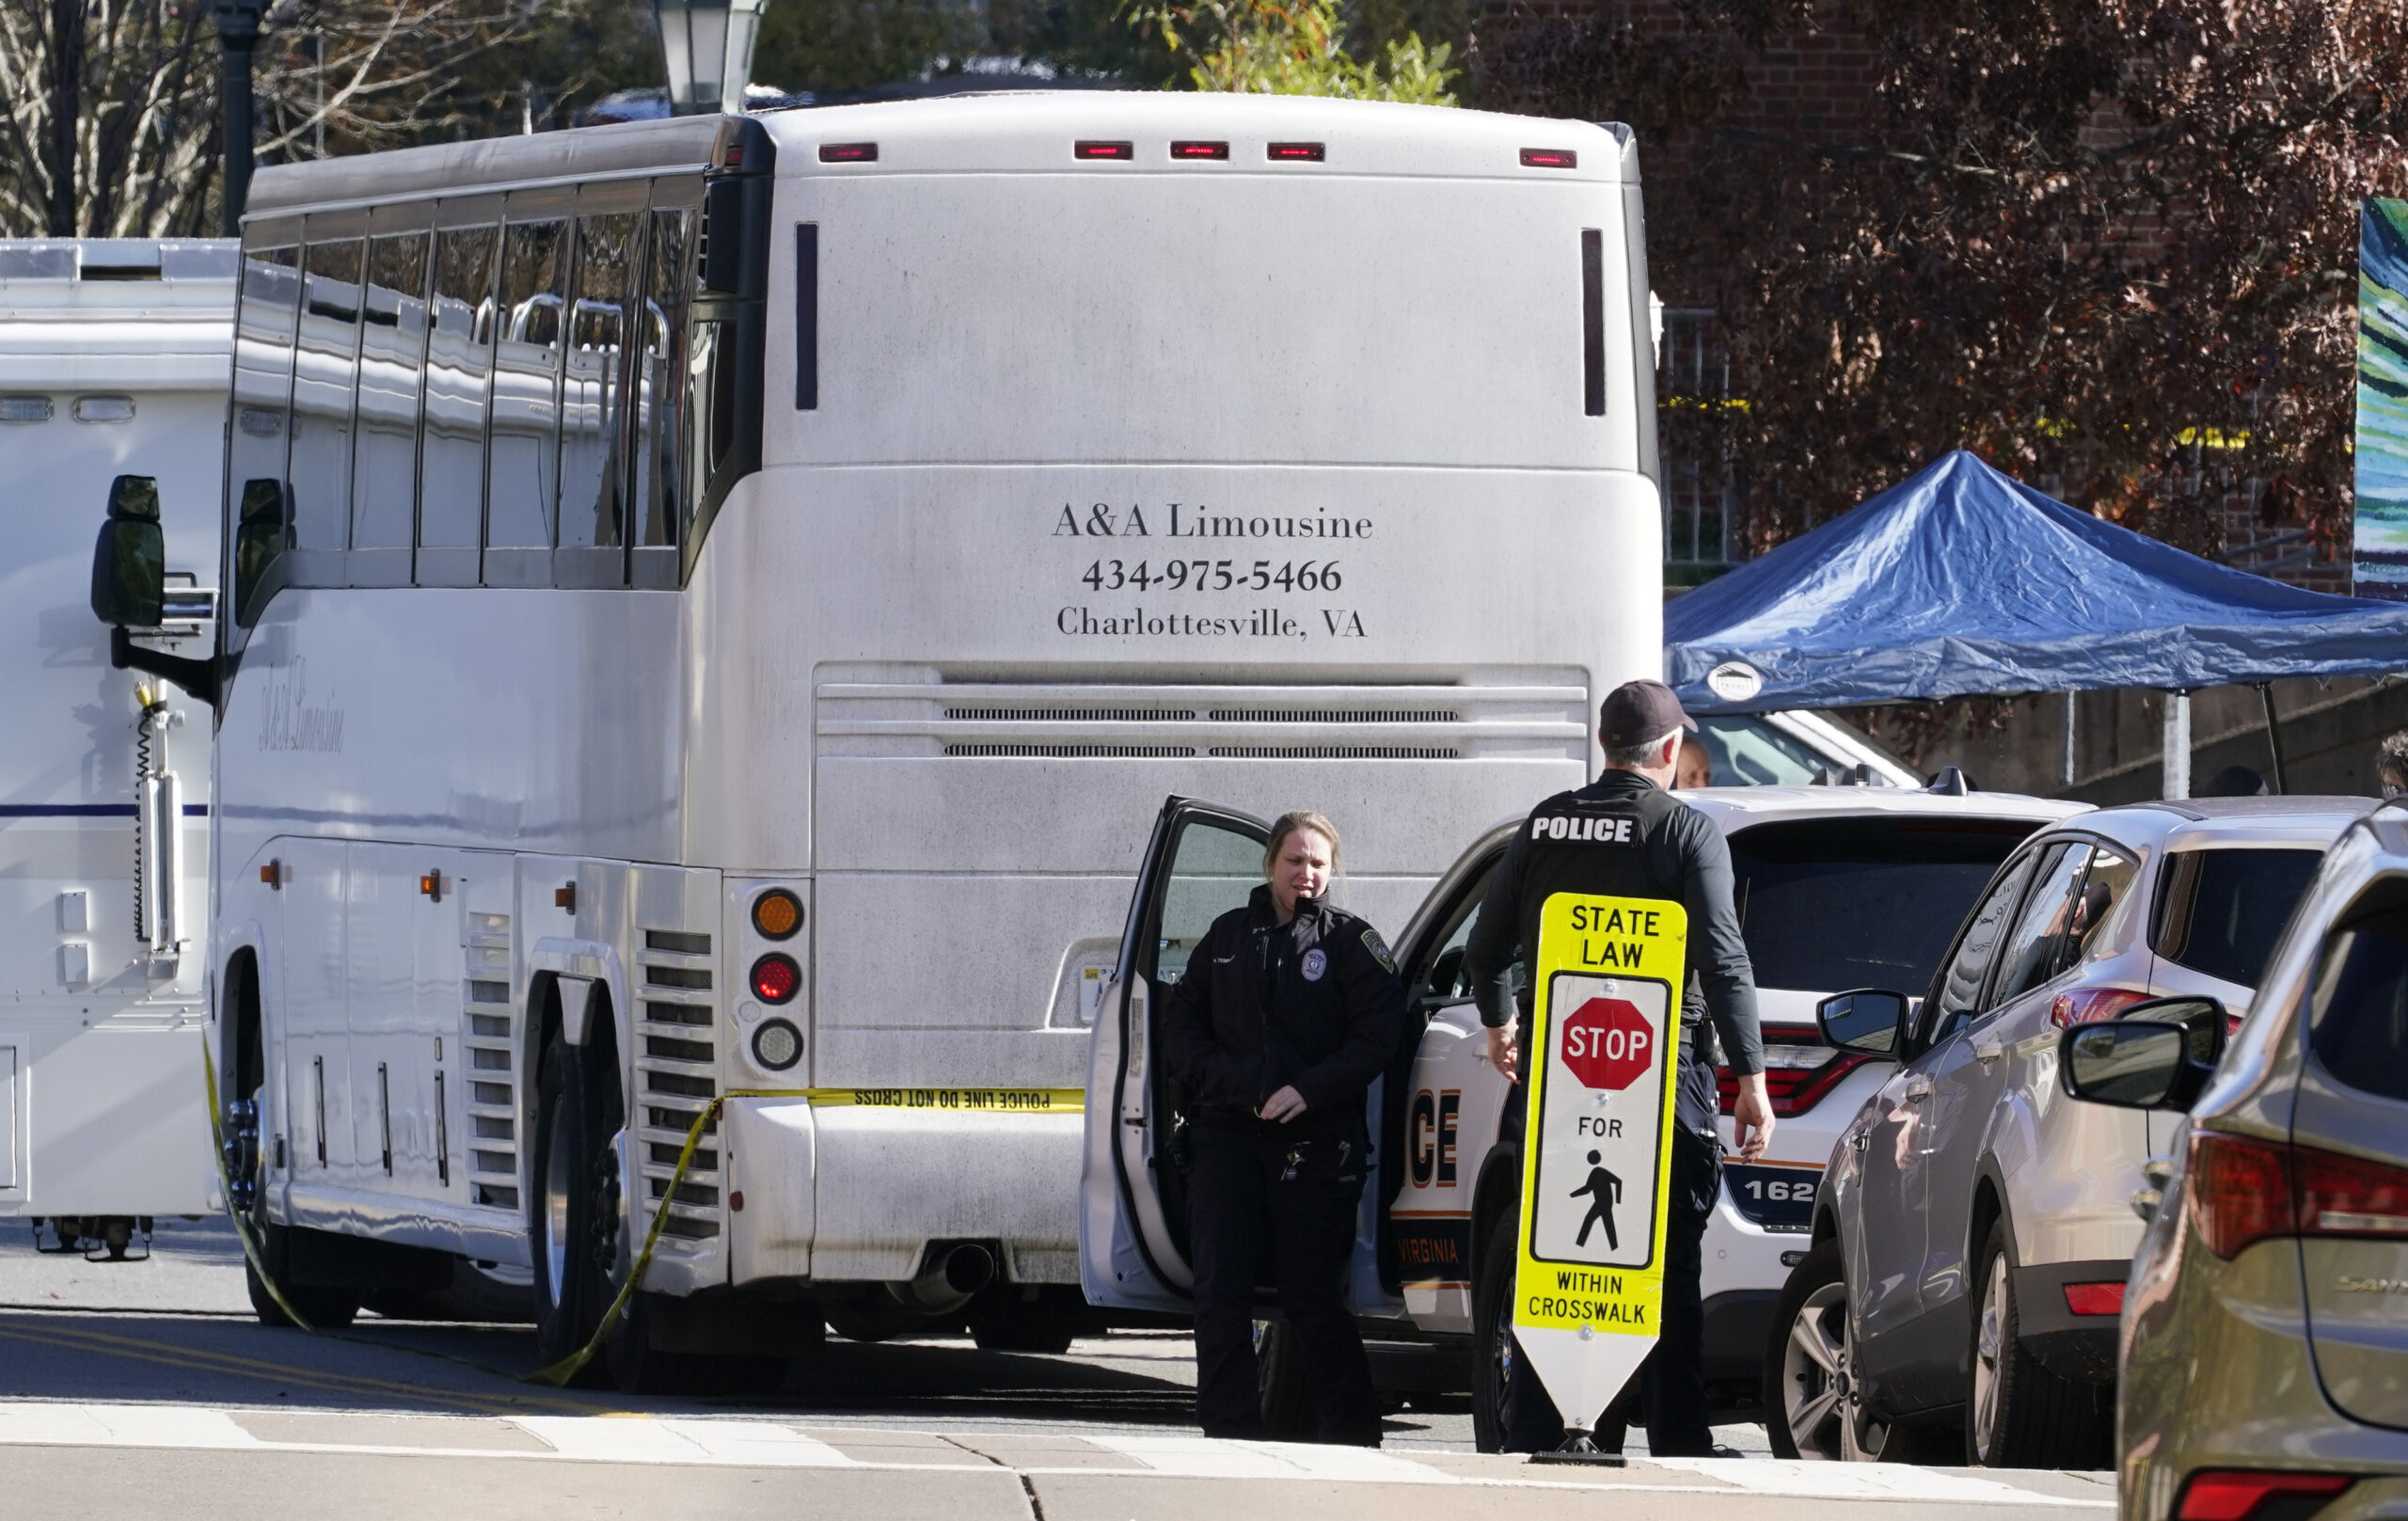 Police investigators work around a bus which is believed to be the site of an overnight shooting